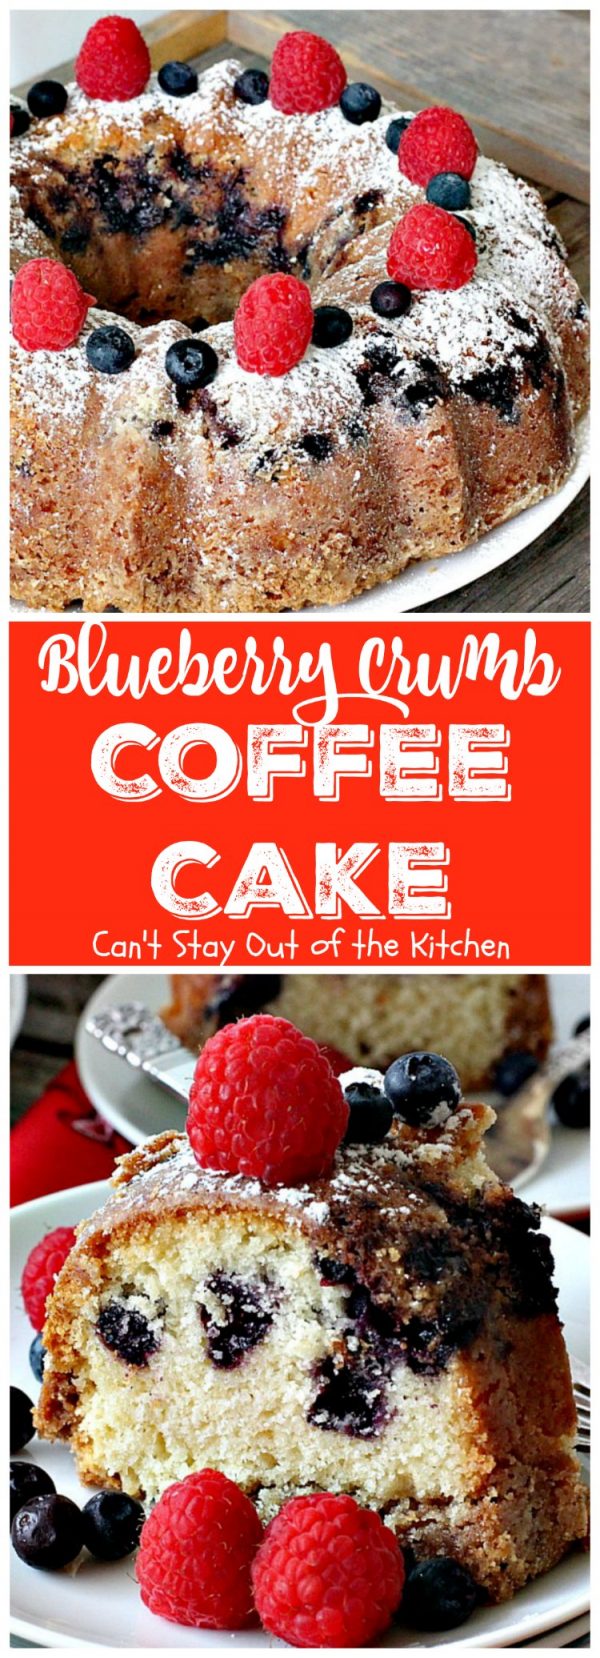 Blueberry Crumb Coffee Cake – Can't Stay Out of the Kitchen